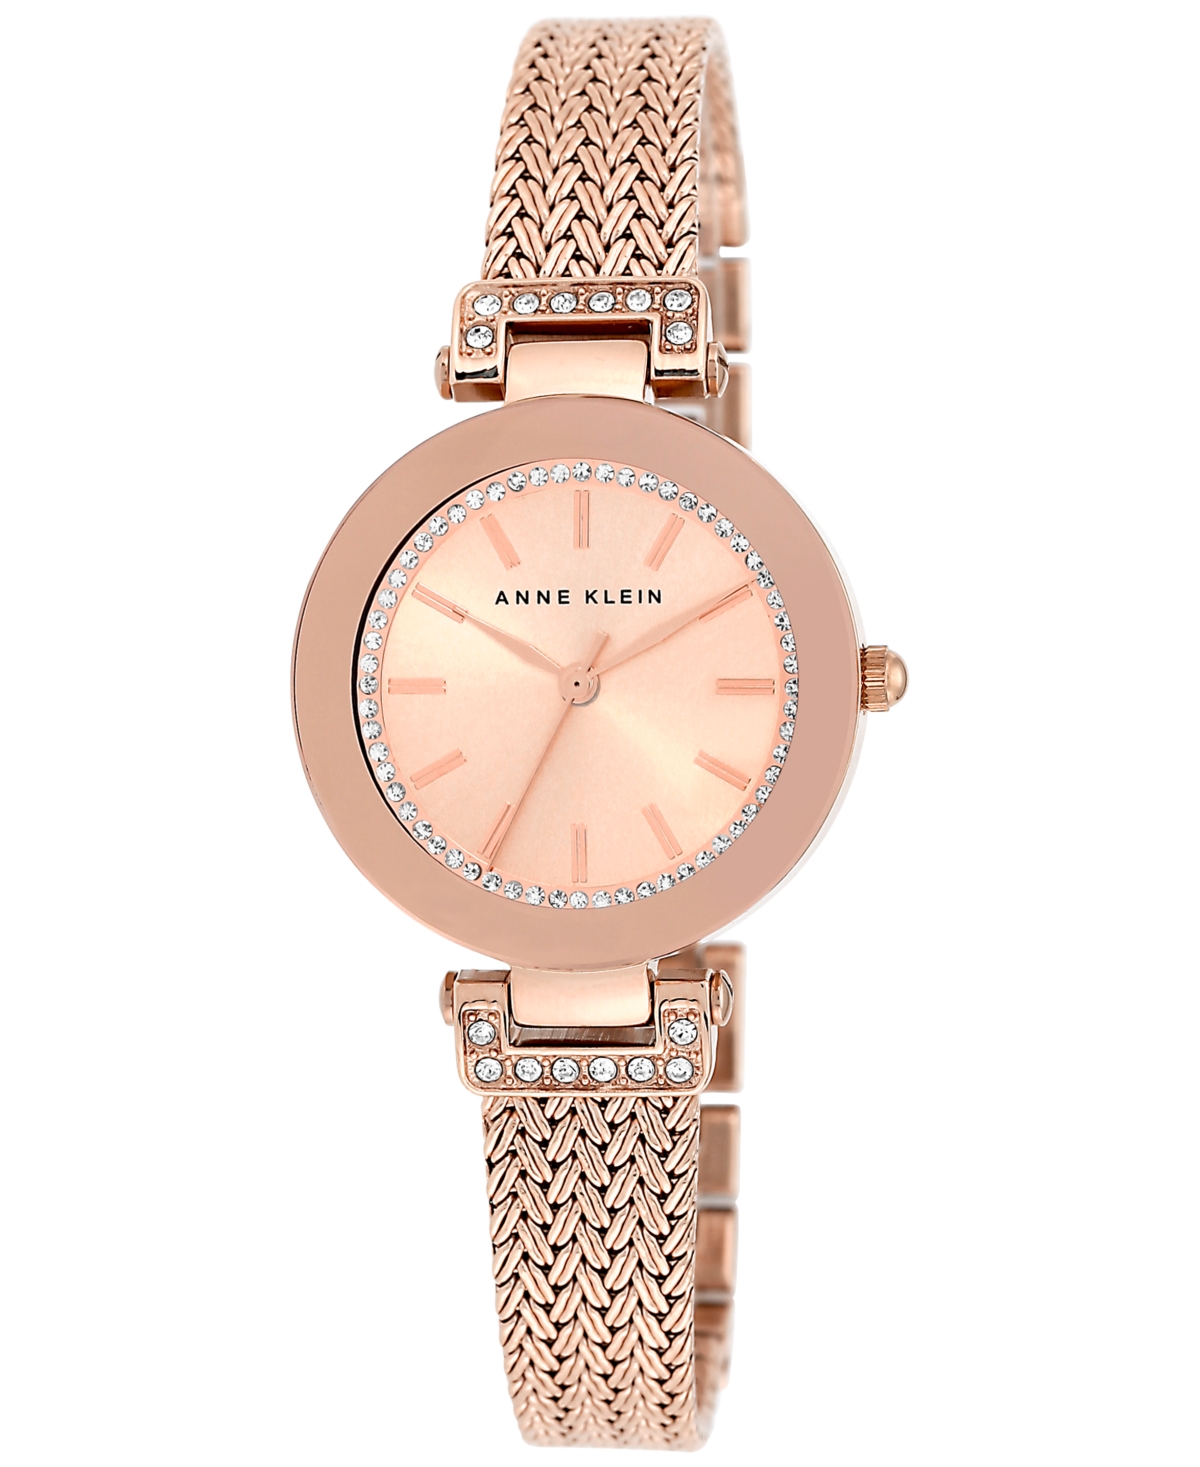 Anne Klein Women's Premium Crystal-accented Rose Gold-tone Stainless Steel Mesh Bracelet Watch 30mm Ak-1906rgrg In No Color